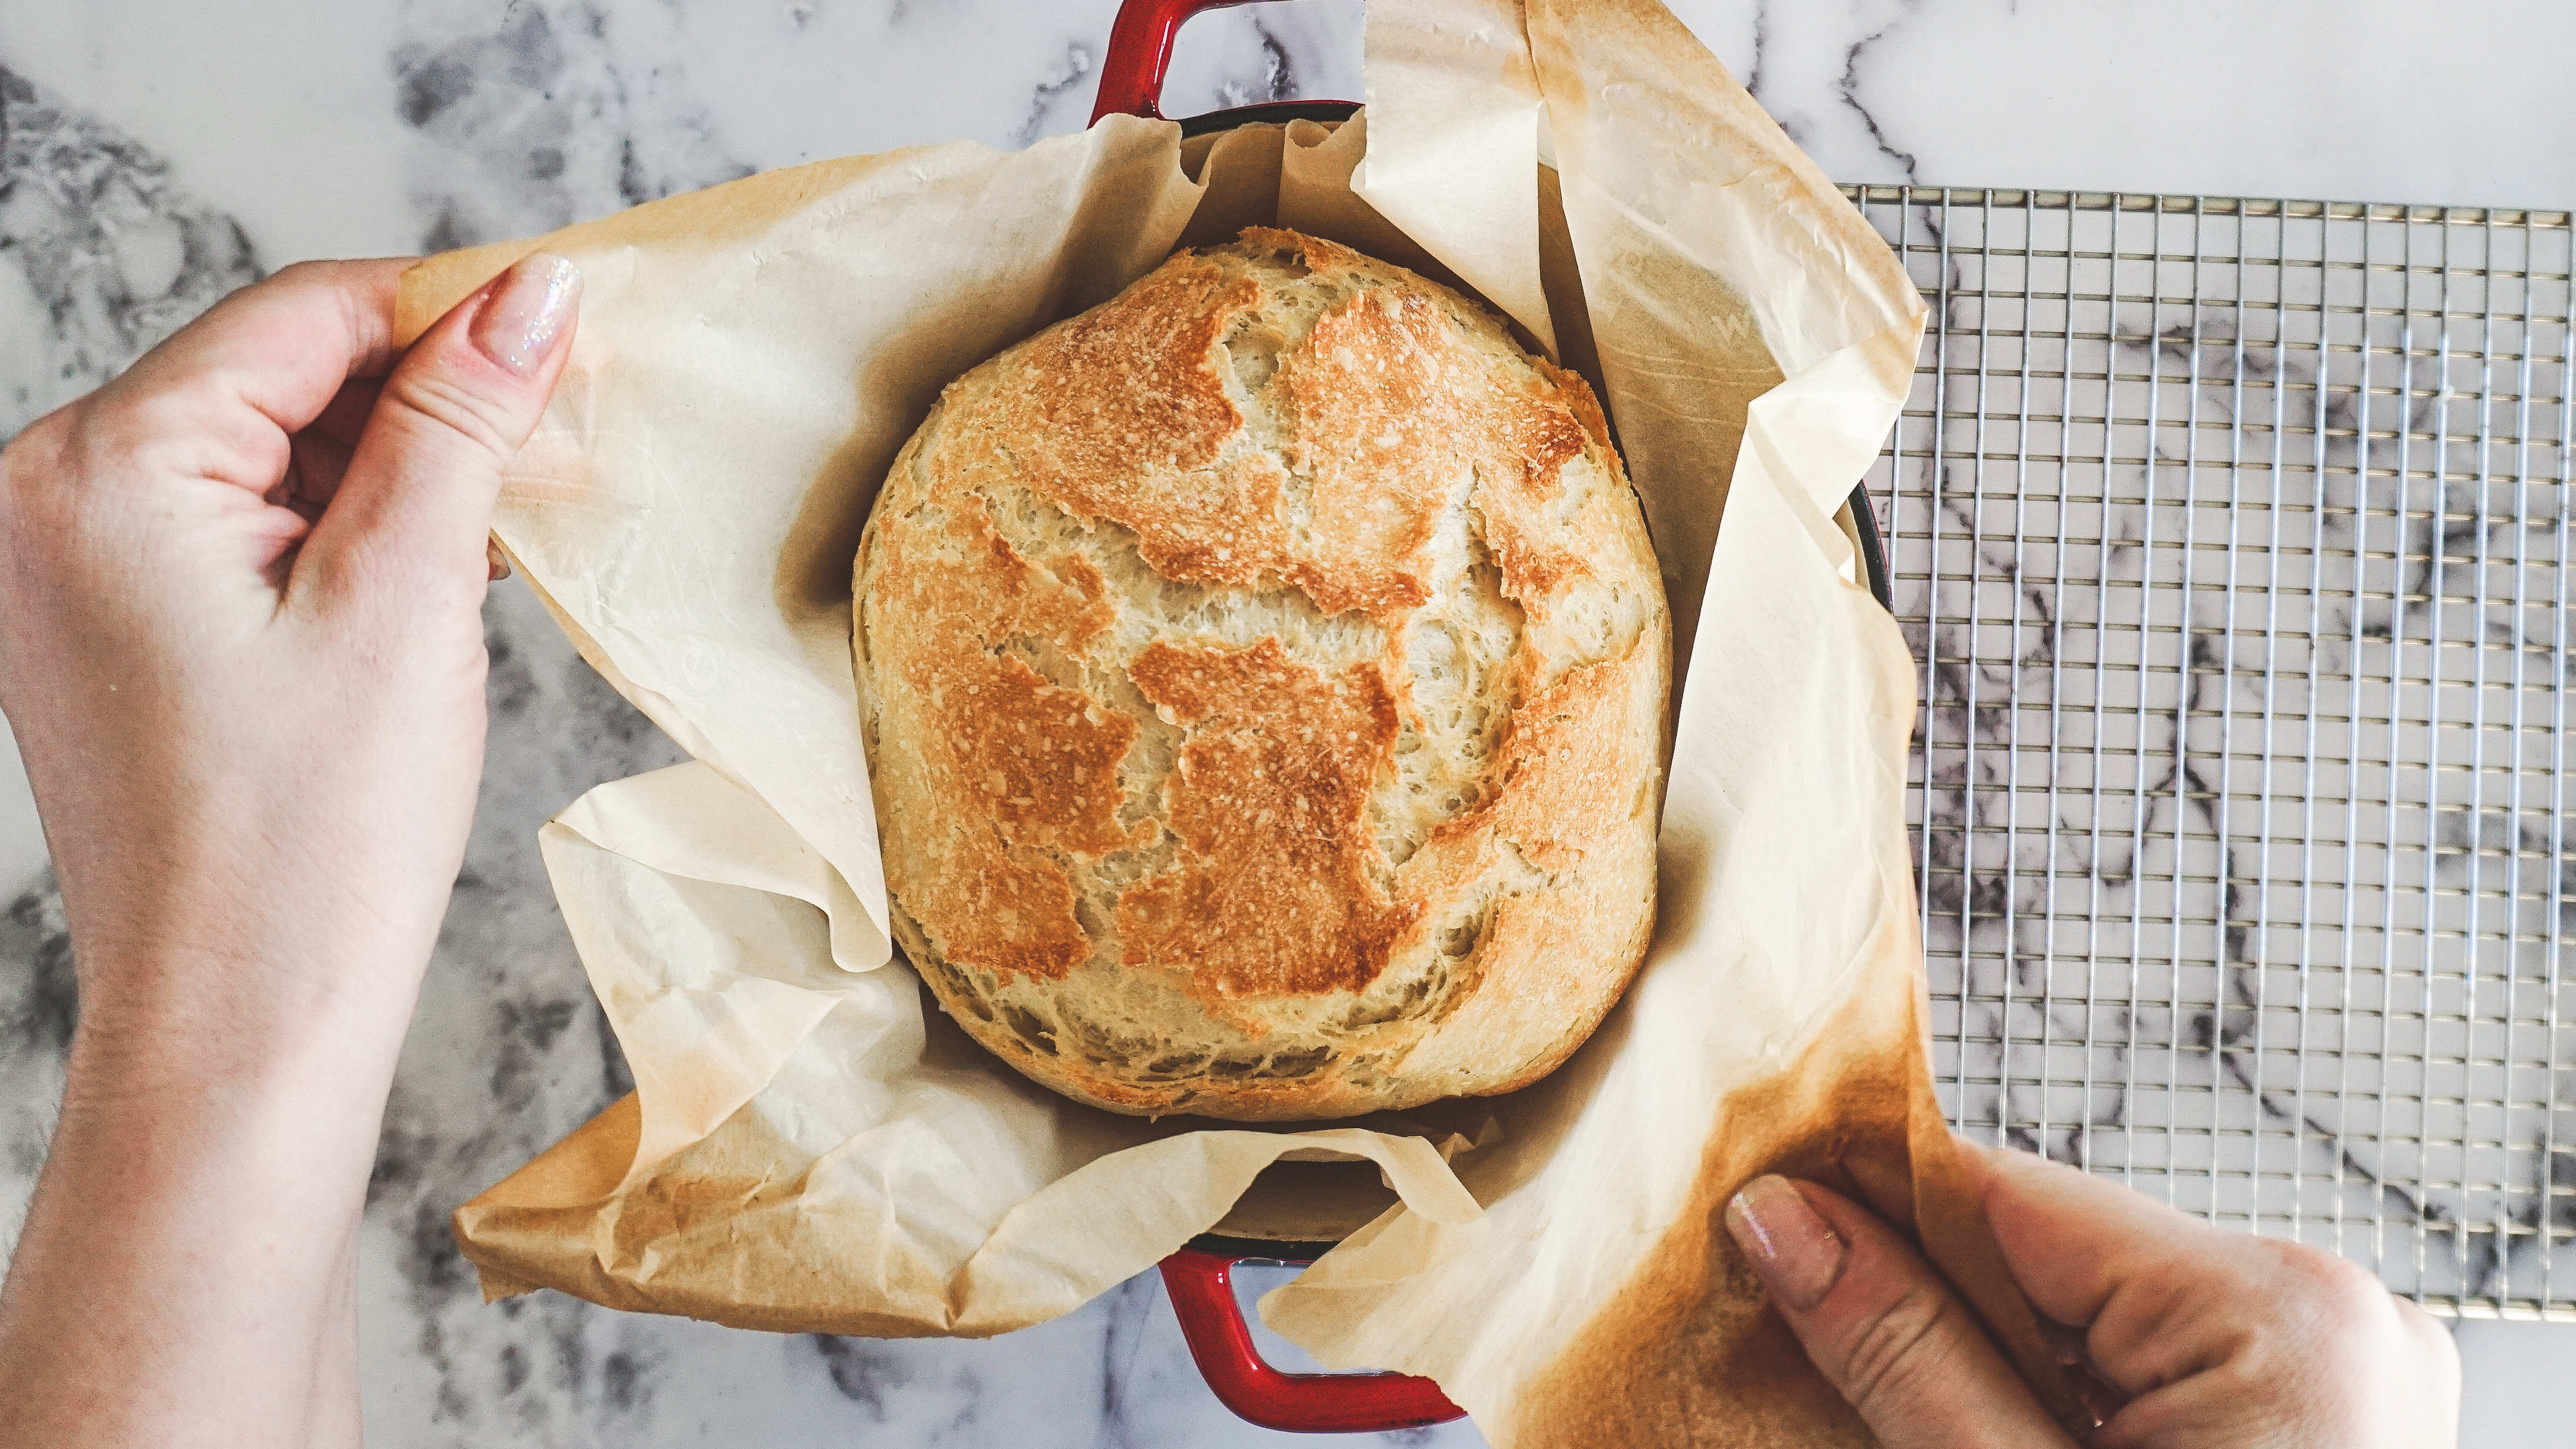 January: Dutch Oven Bread - Bake from Scratch